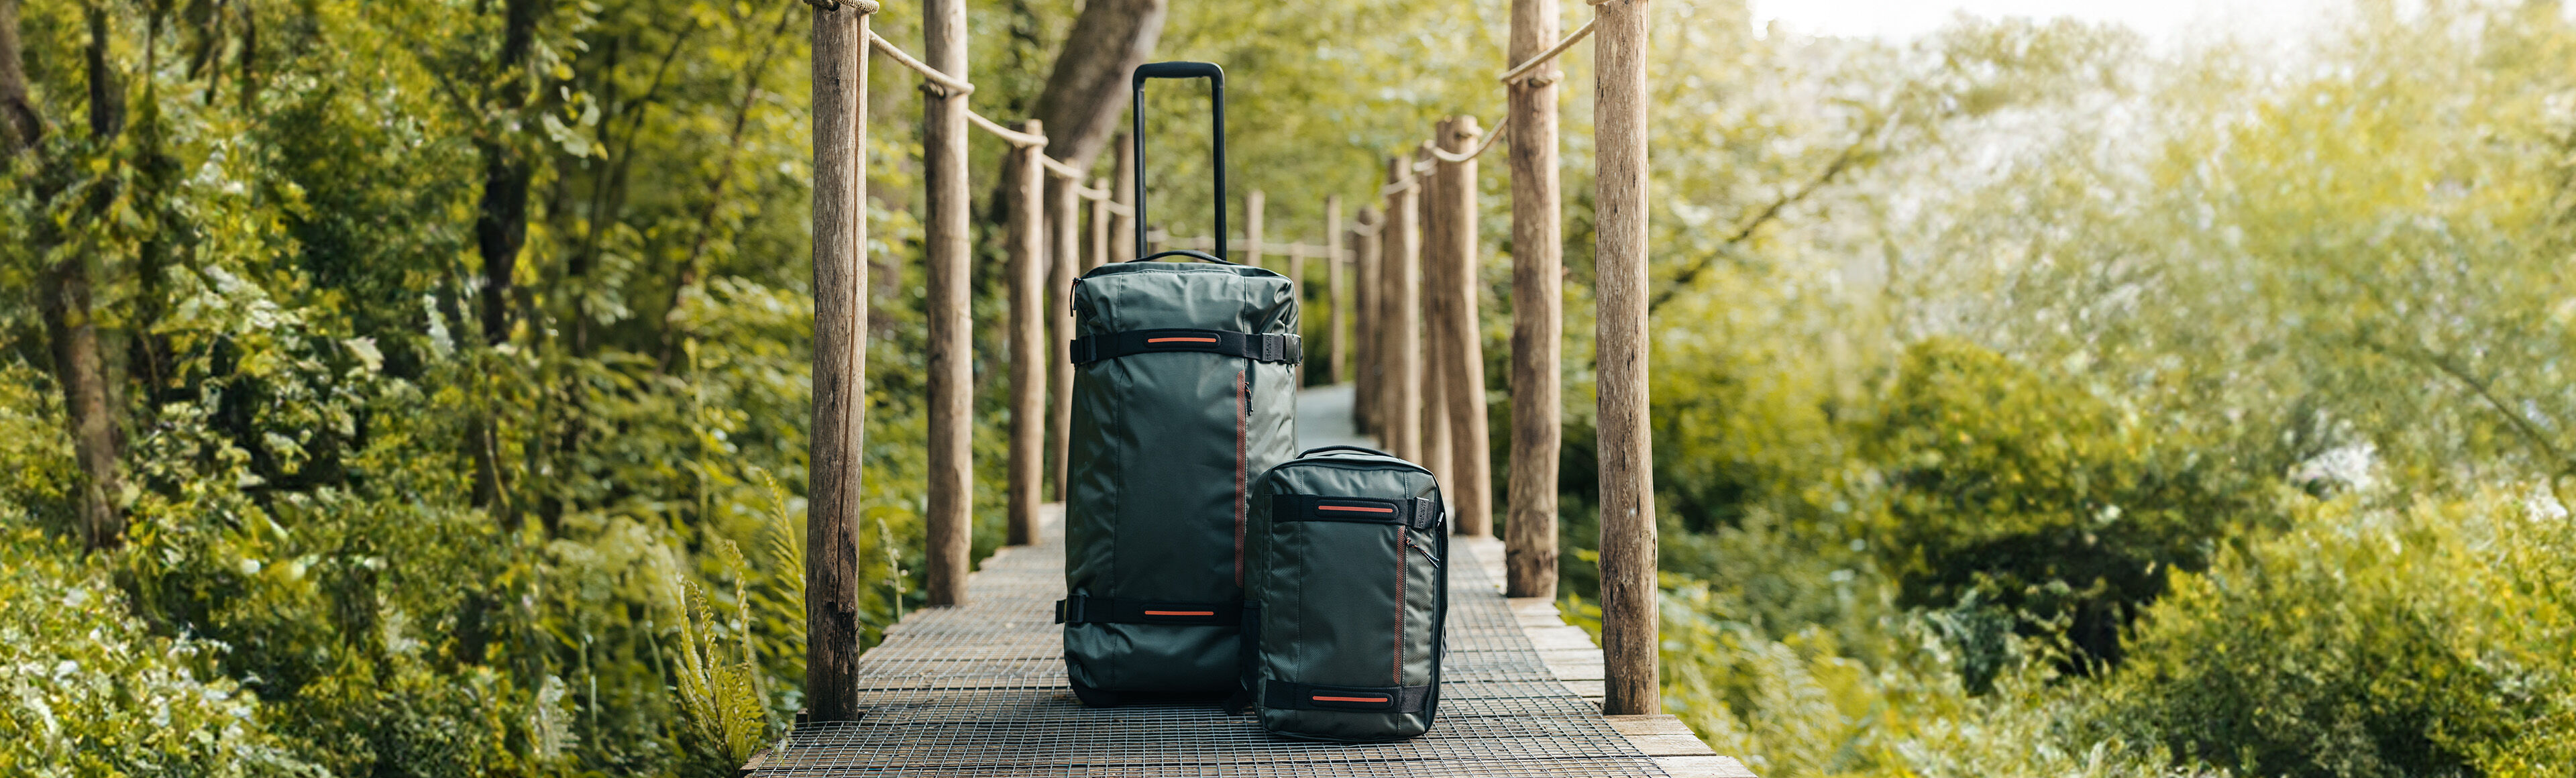 Recyclex™ luggage and backpacks